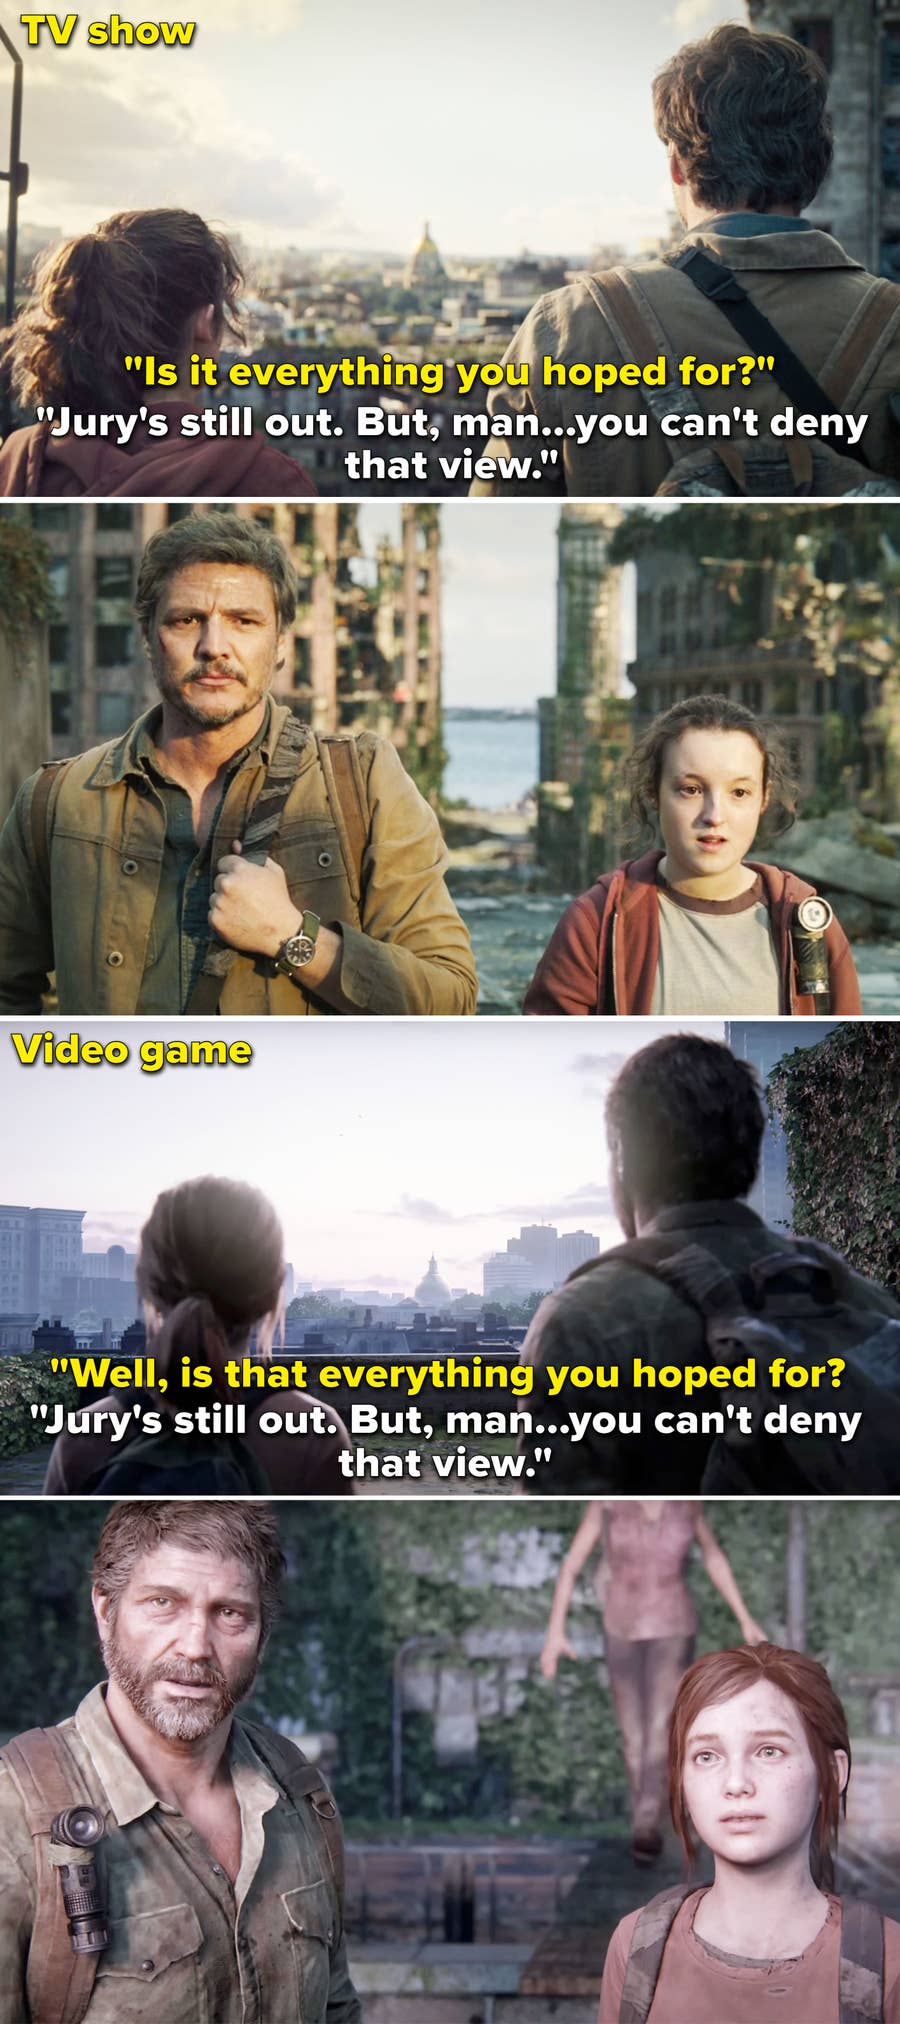 The Last of Us fans are having a pretty fantastic day